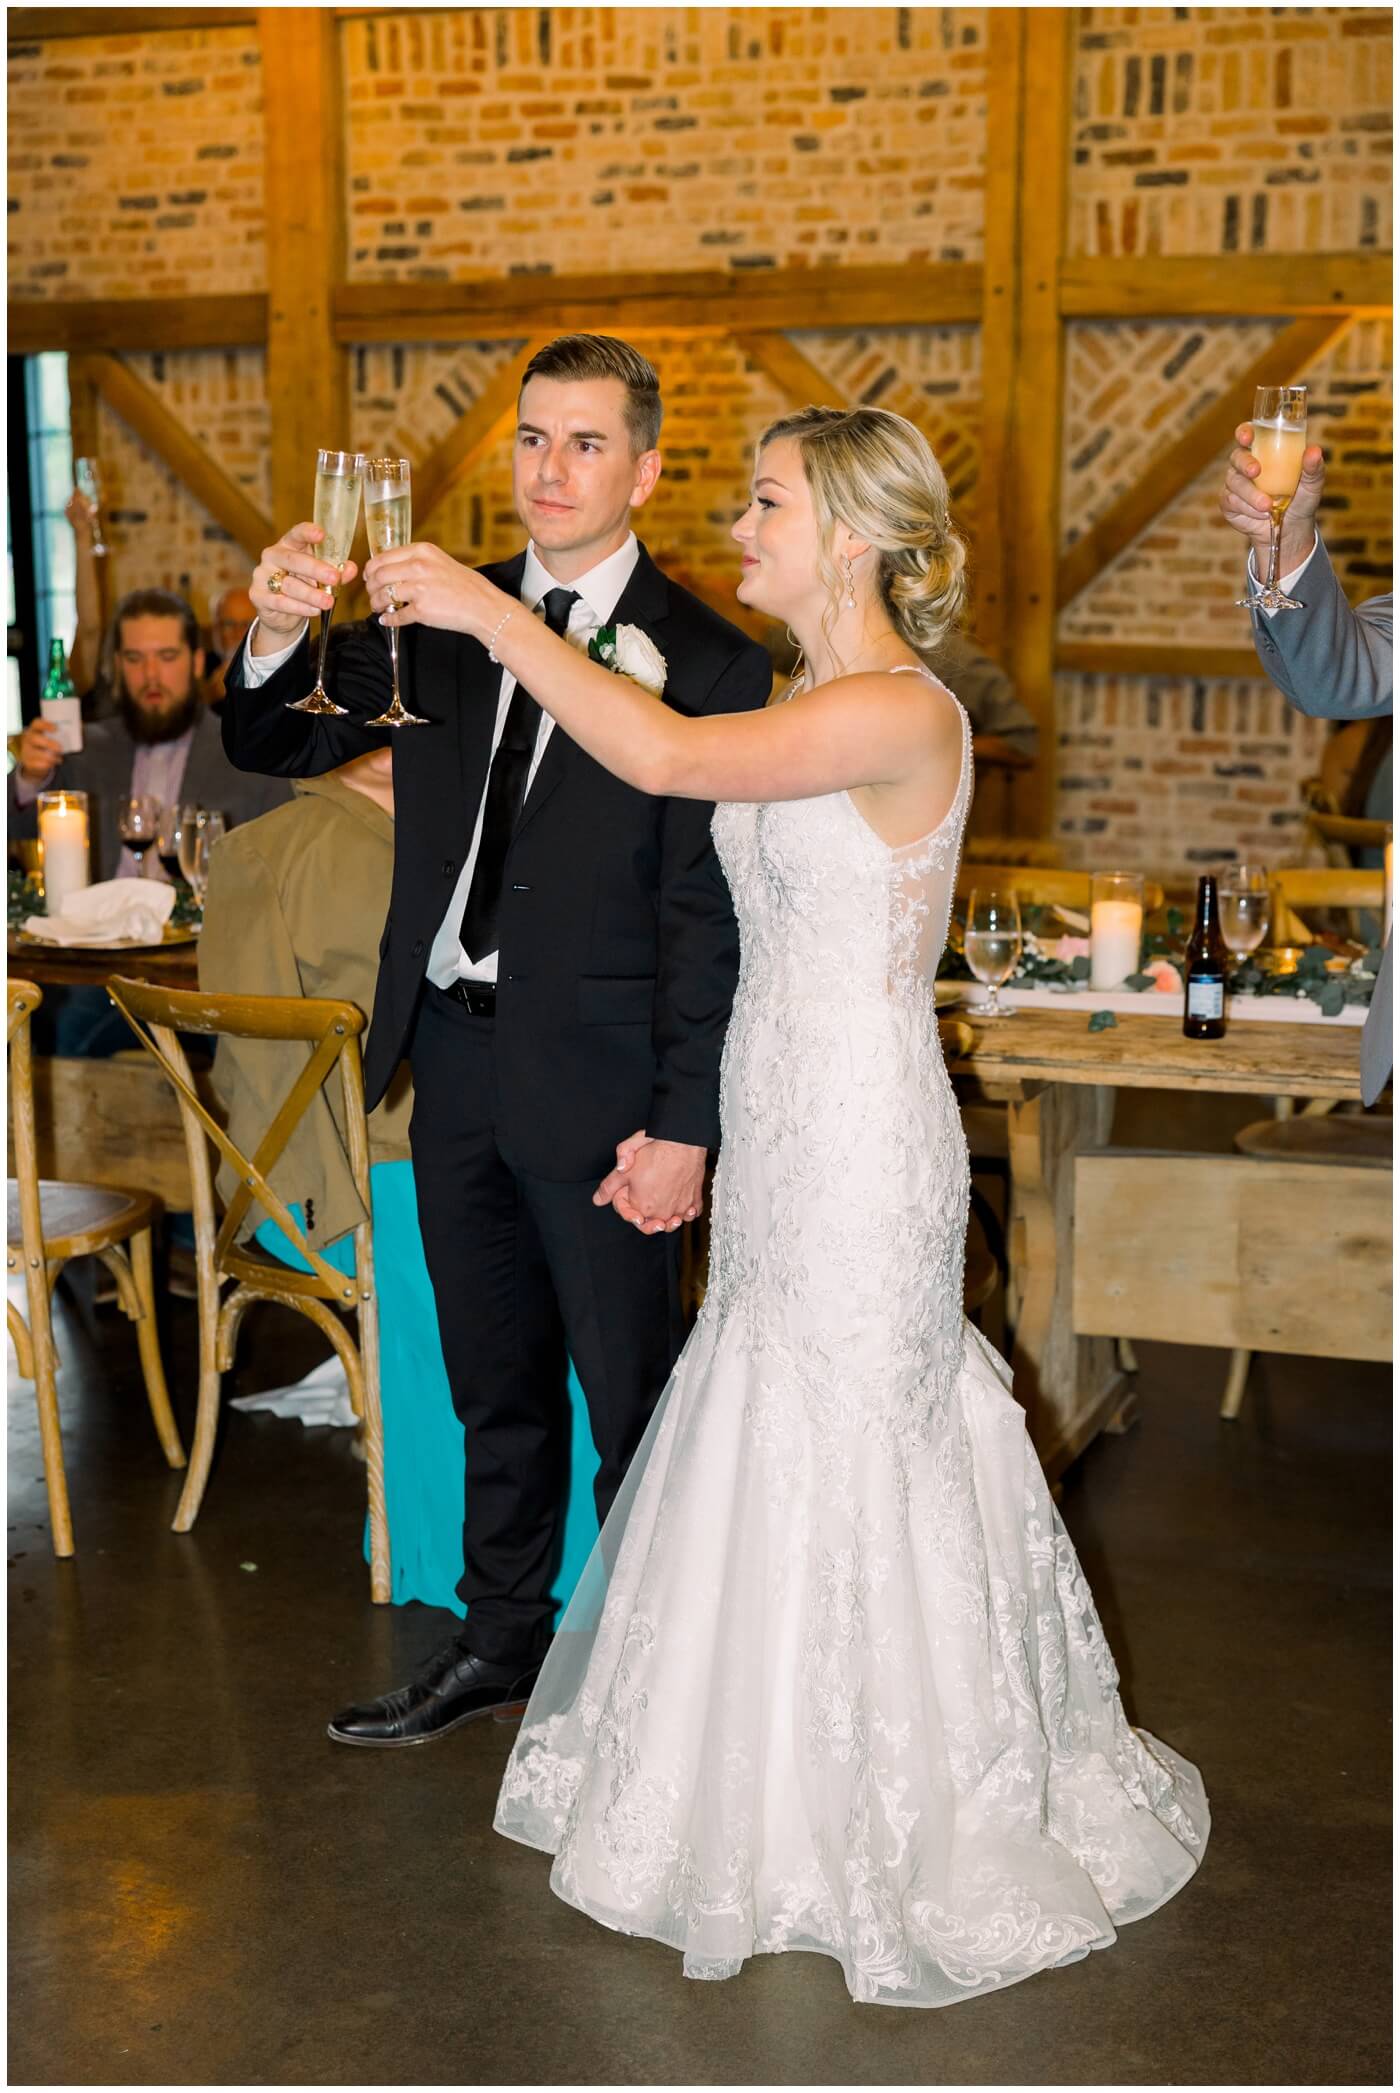 The couple toast as they listen to loved ones share a speech